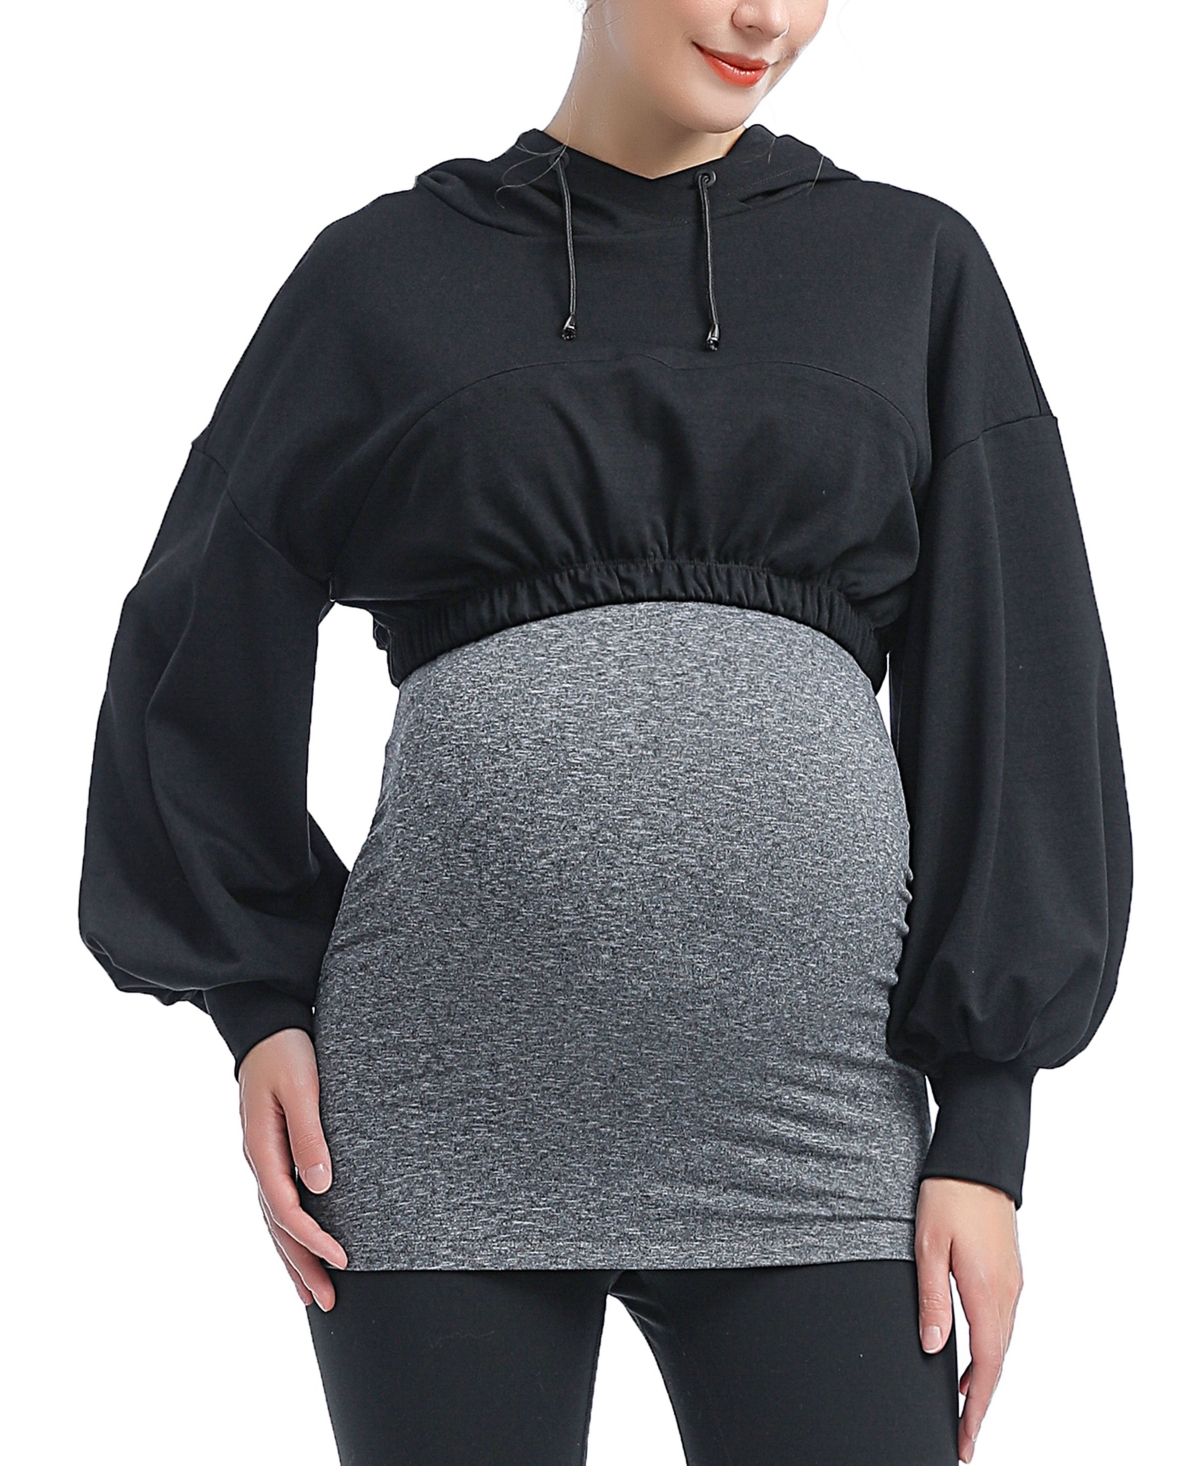 kimi + kai Maternity Active Nursing Hoodie with Removable belly band - Black/gray